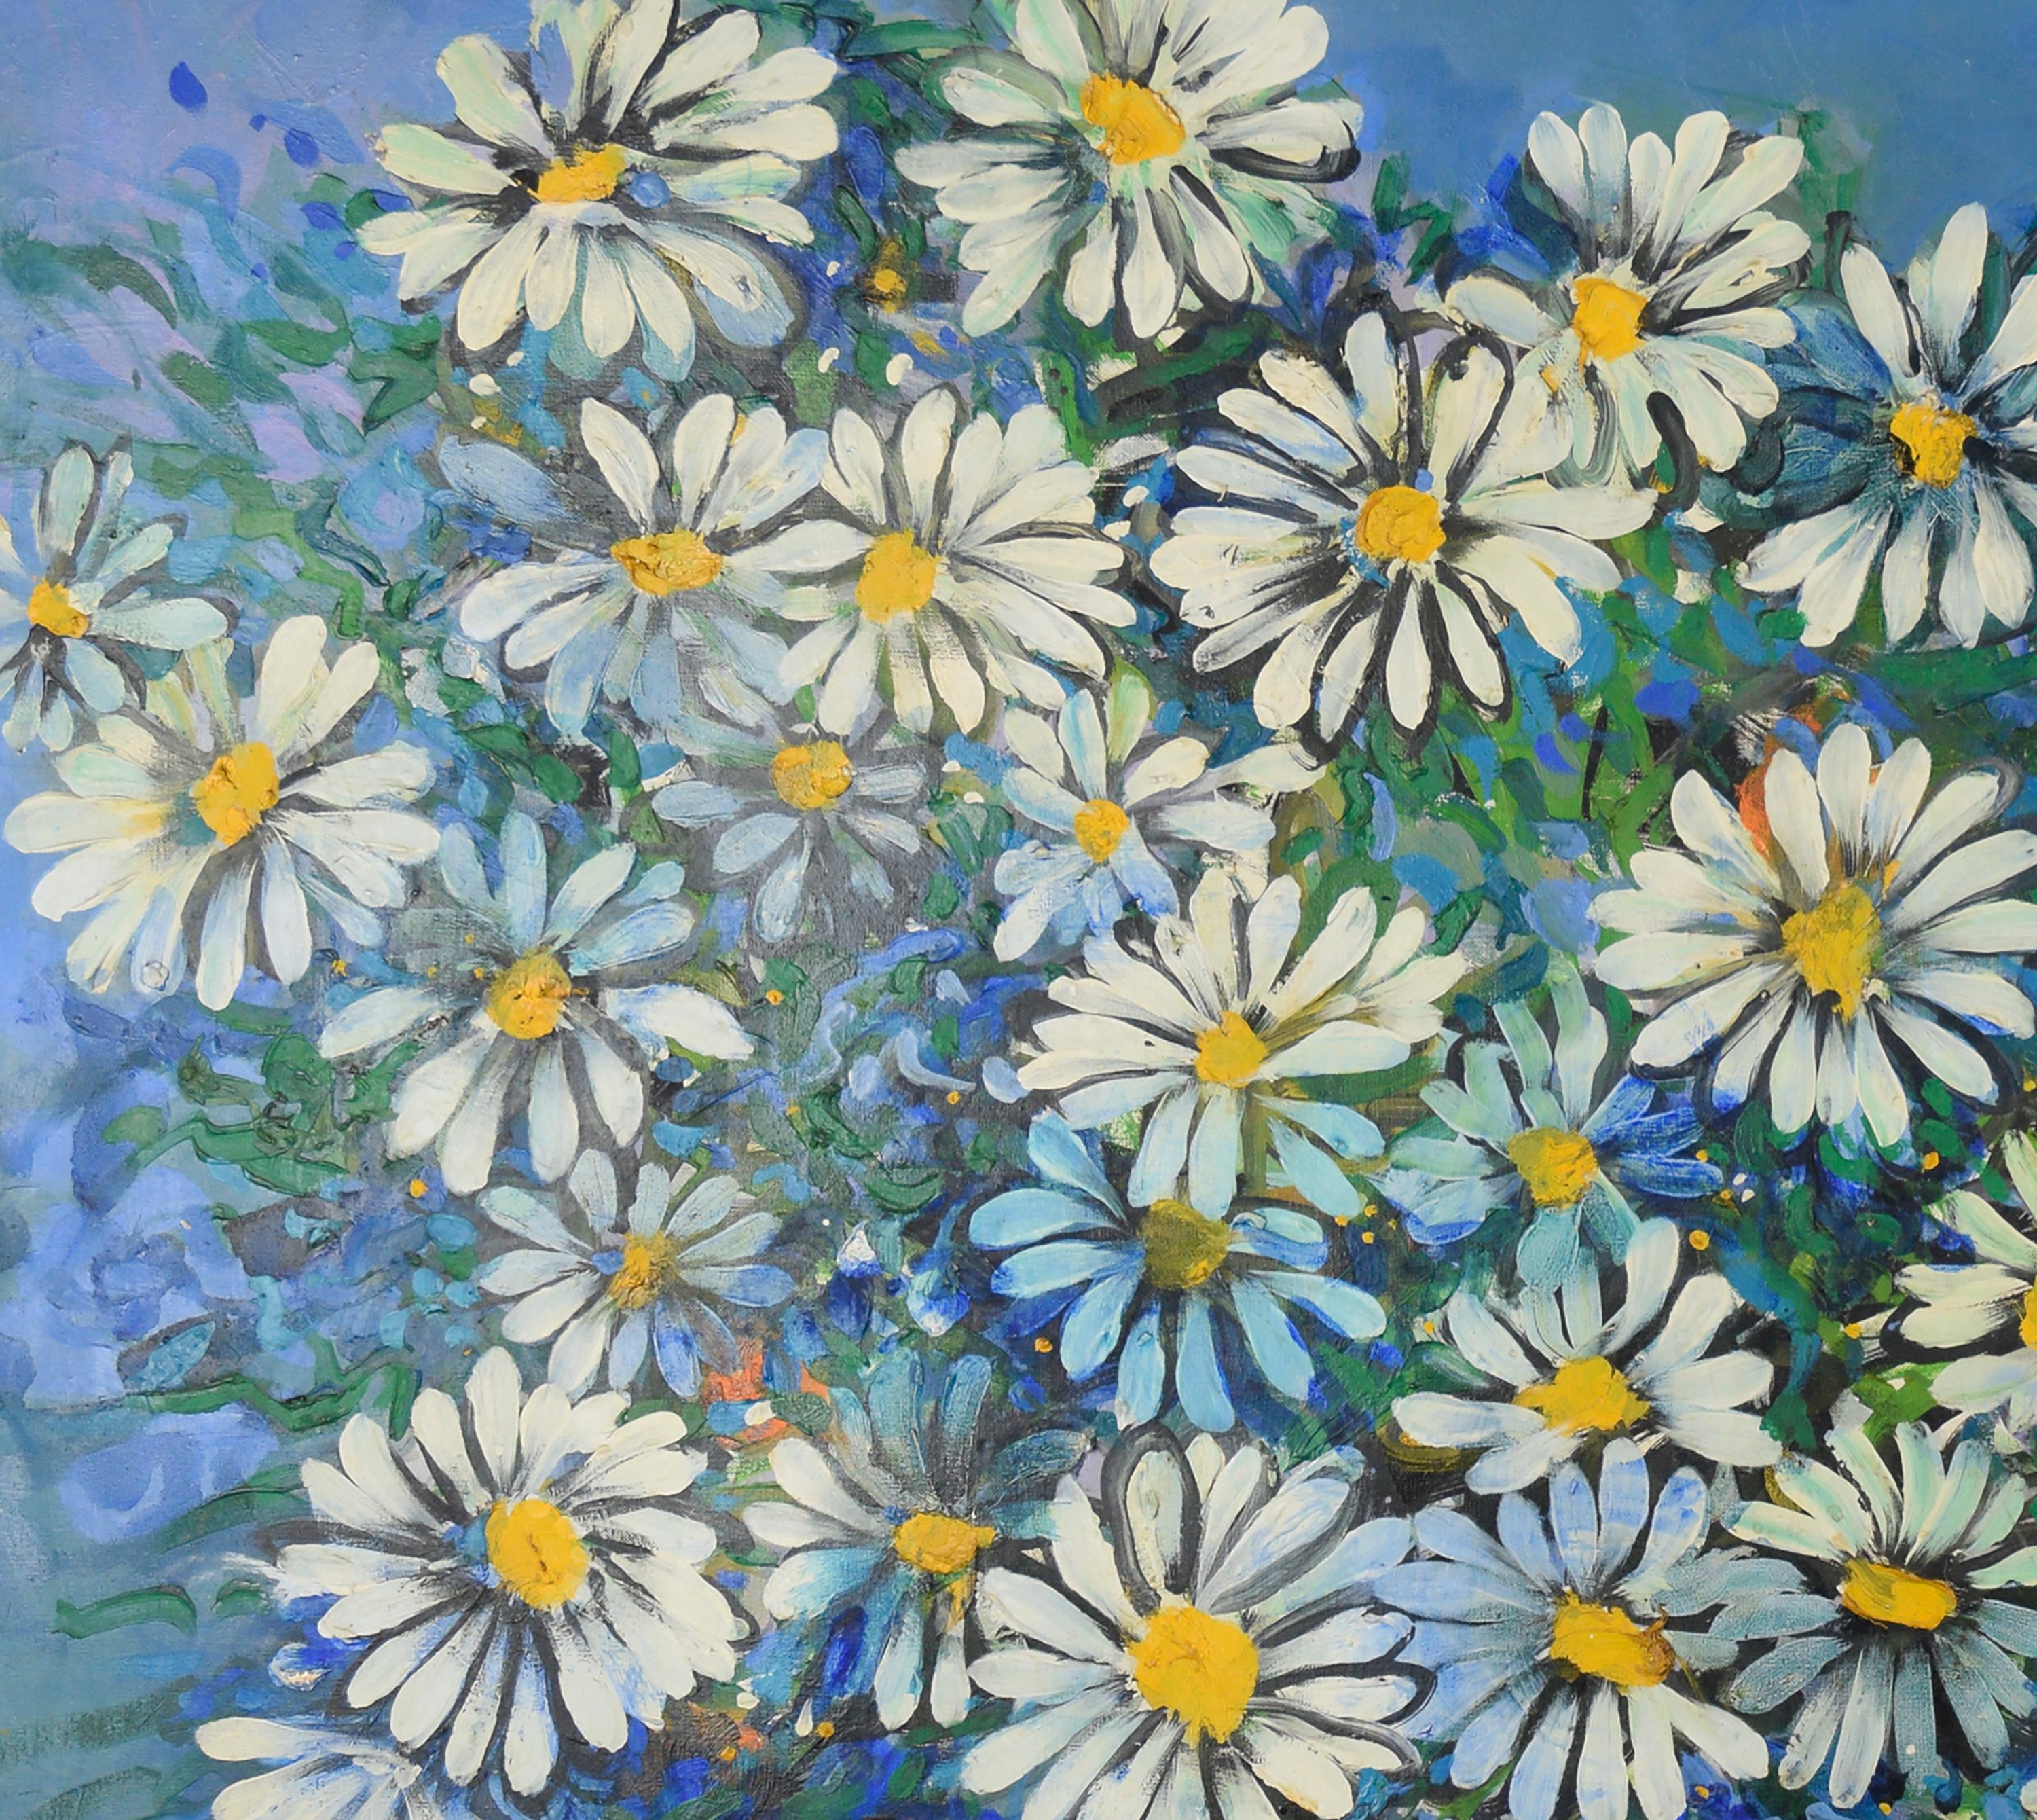 Marguerite Daisy Flowers, Large-Scale Mid Century Still-Life  - Painting by Marilyn Rabinovich